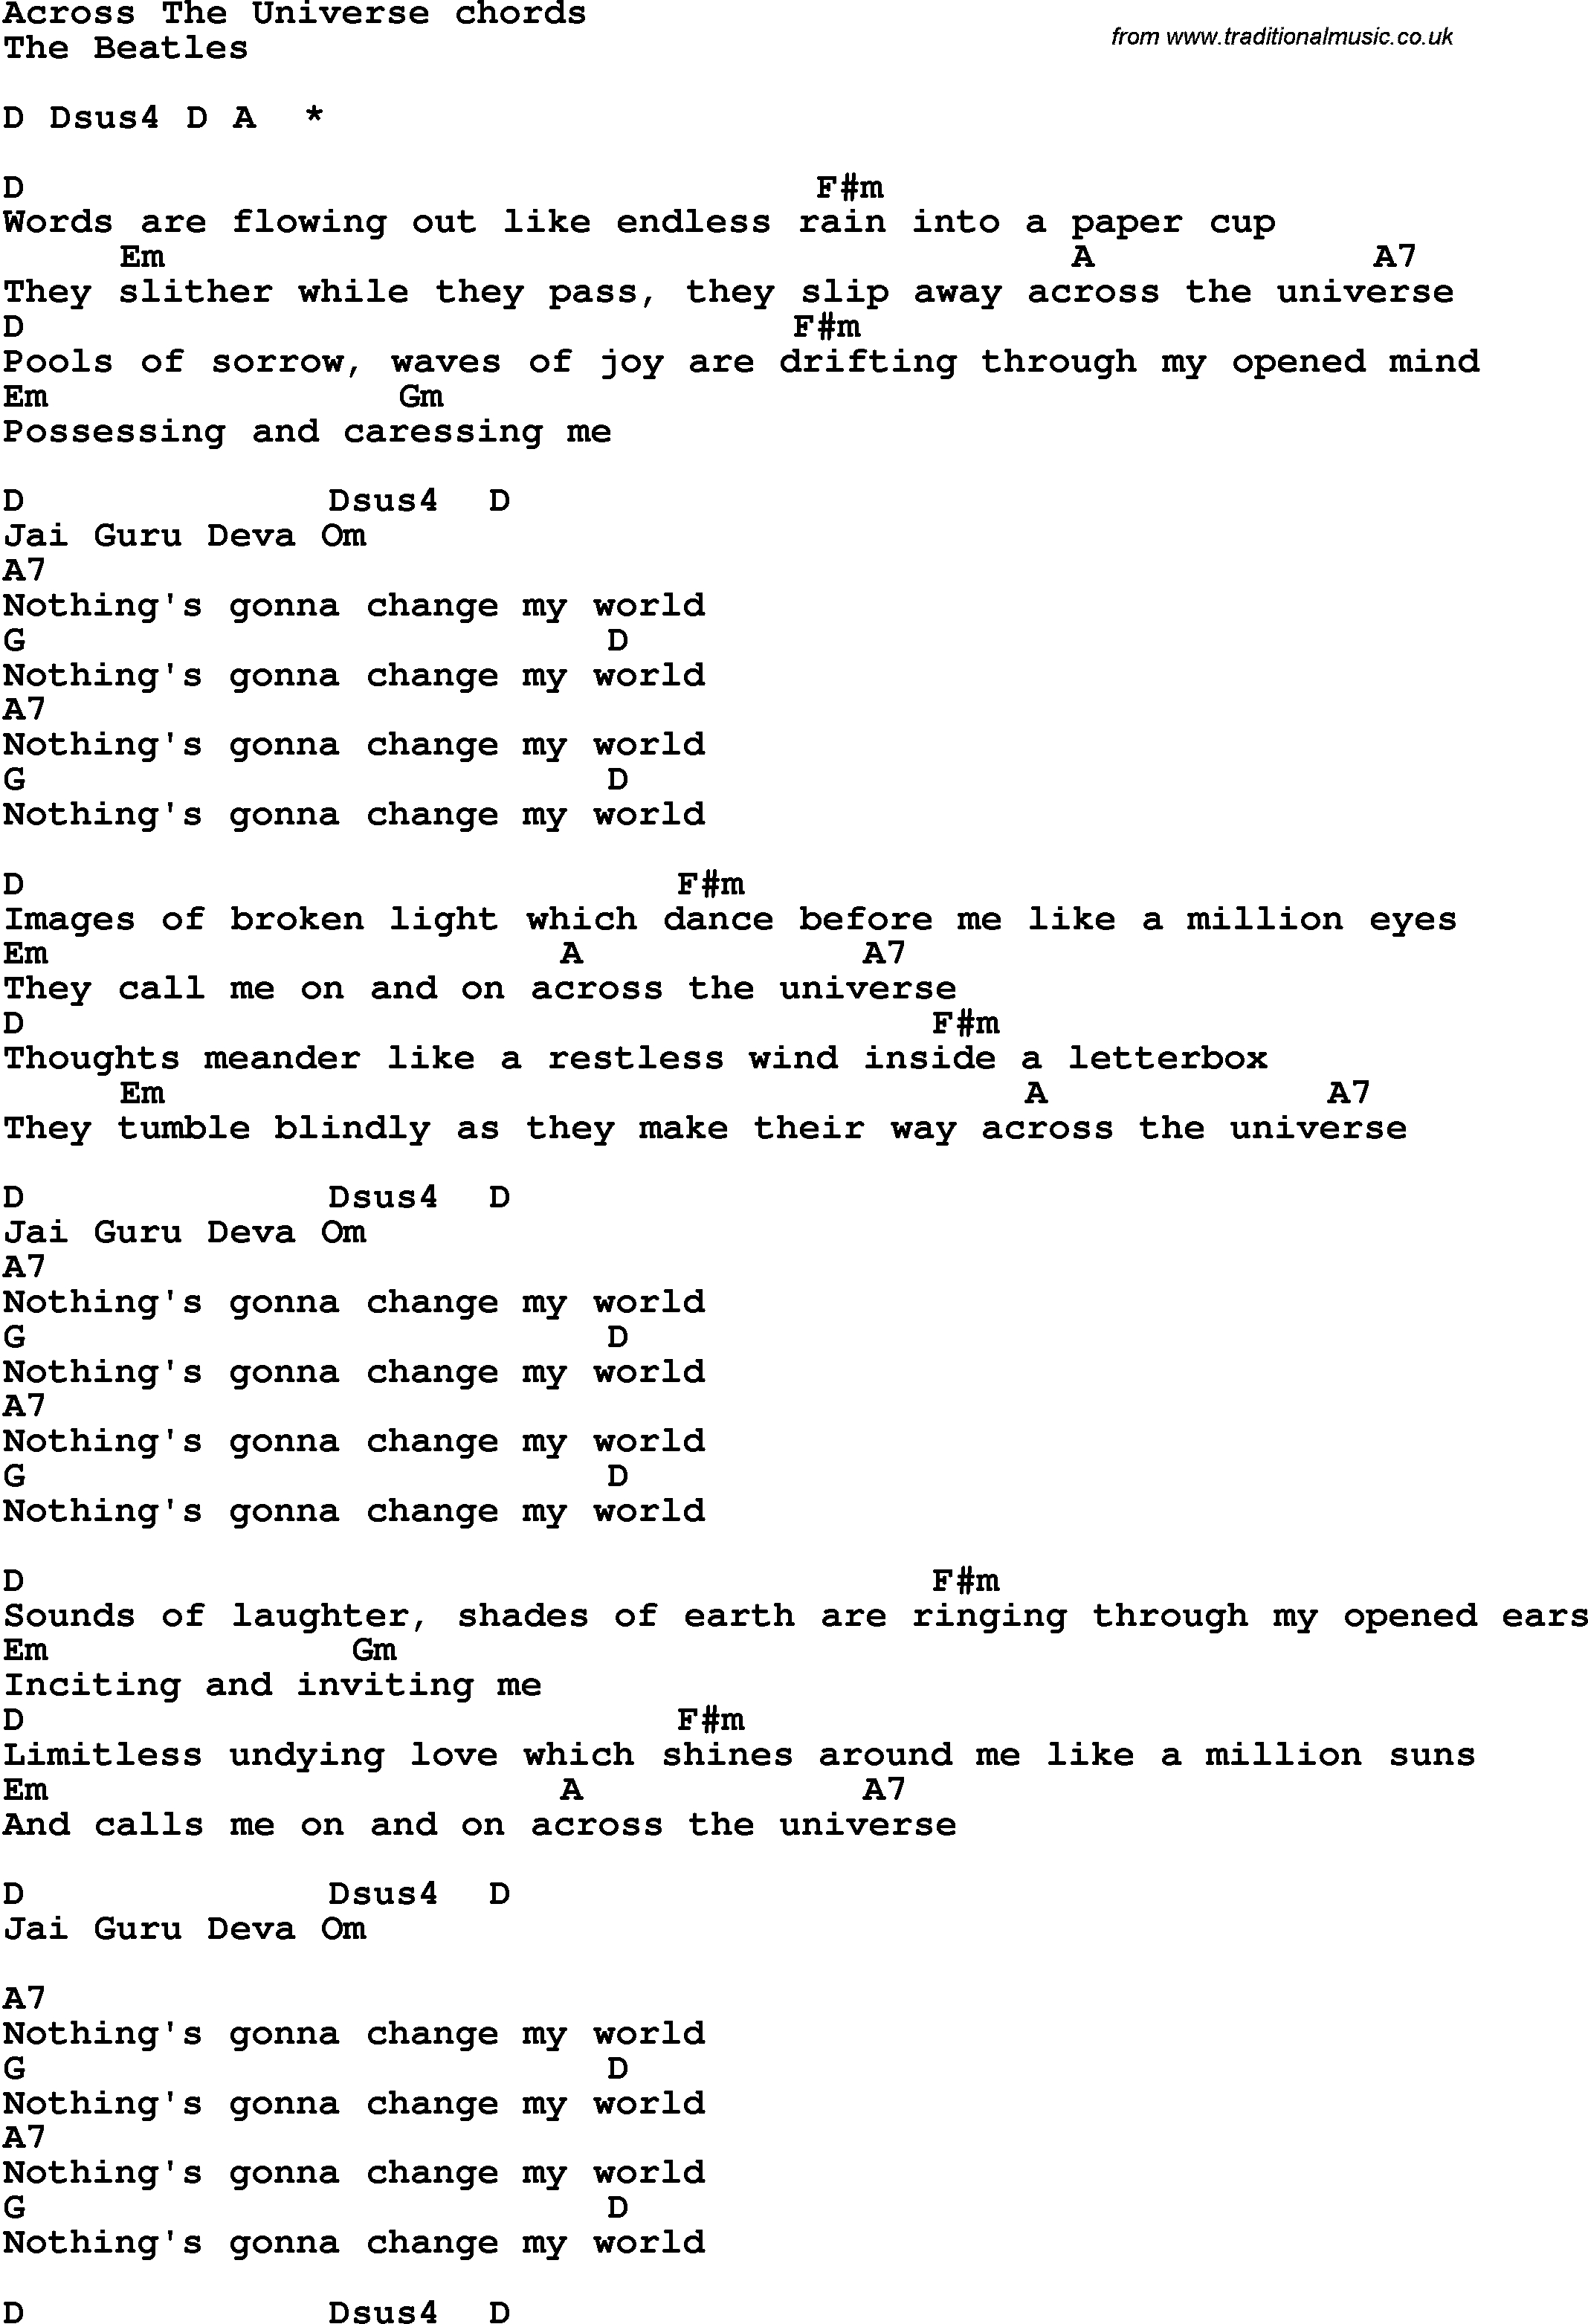 Across The Universe Chords Song Lyrics With Guitar Chords For Across The Universe The Beatles